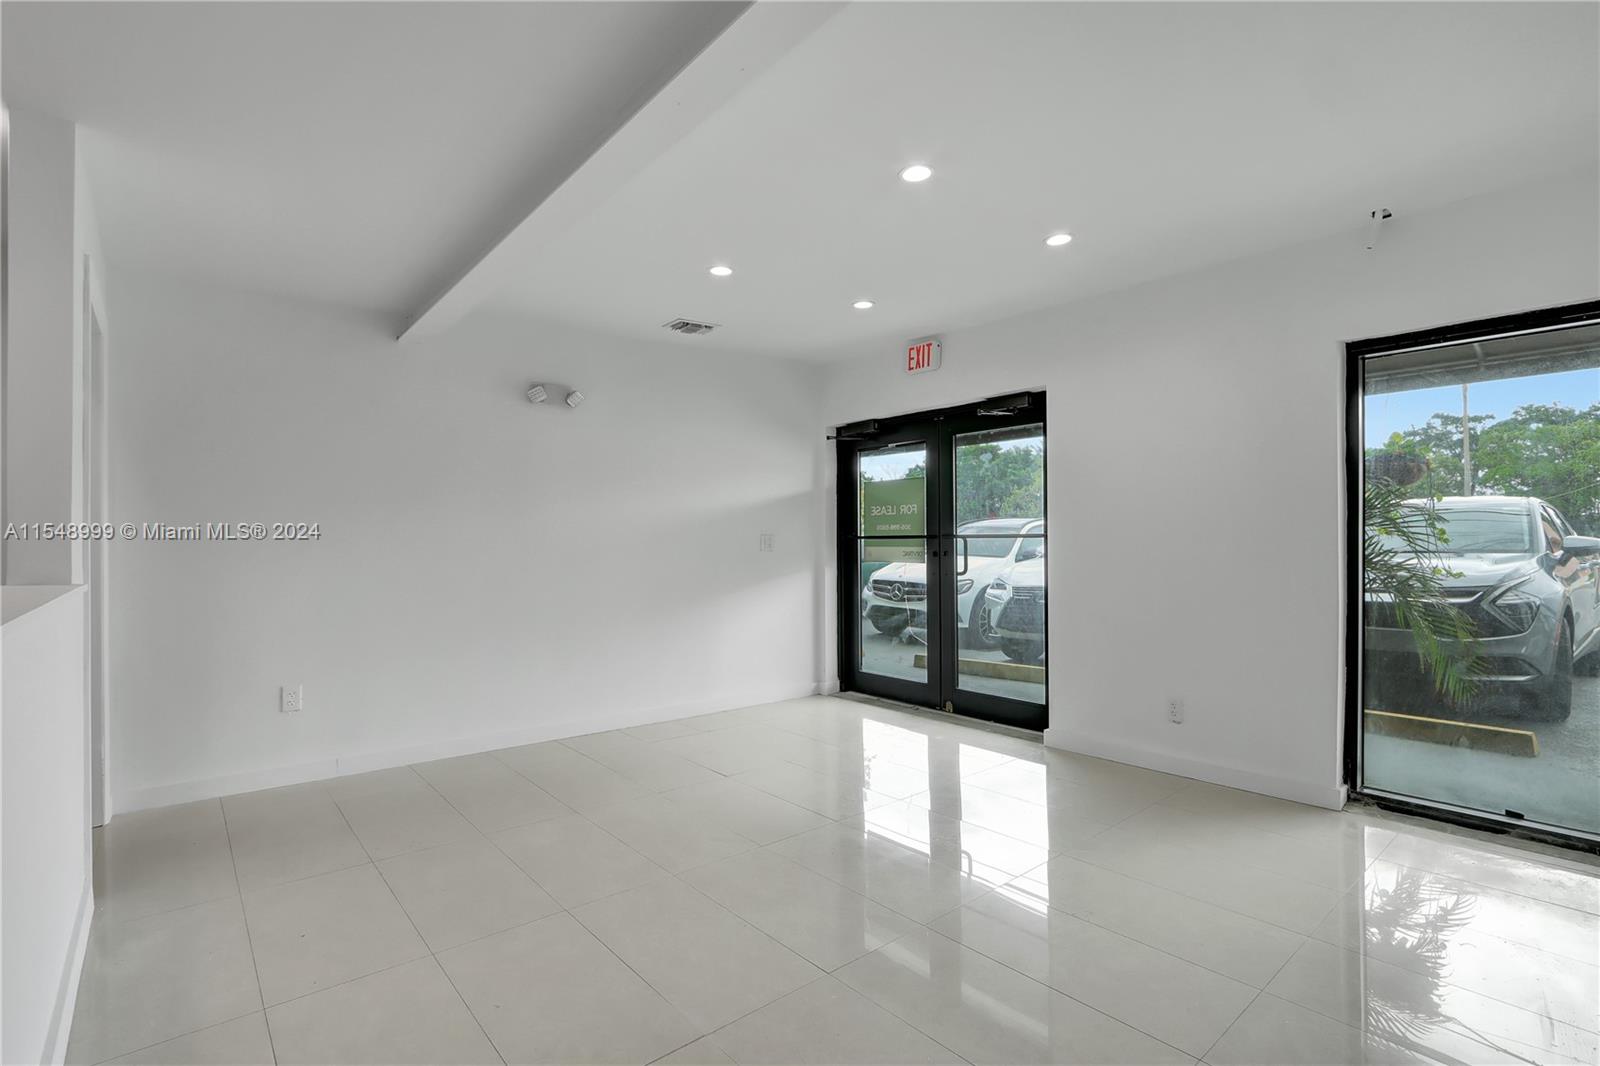 7000 NW 2nd Ave #7010 For Sale A11548999, FL